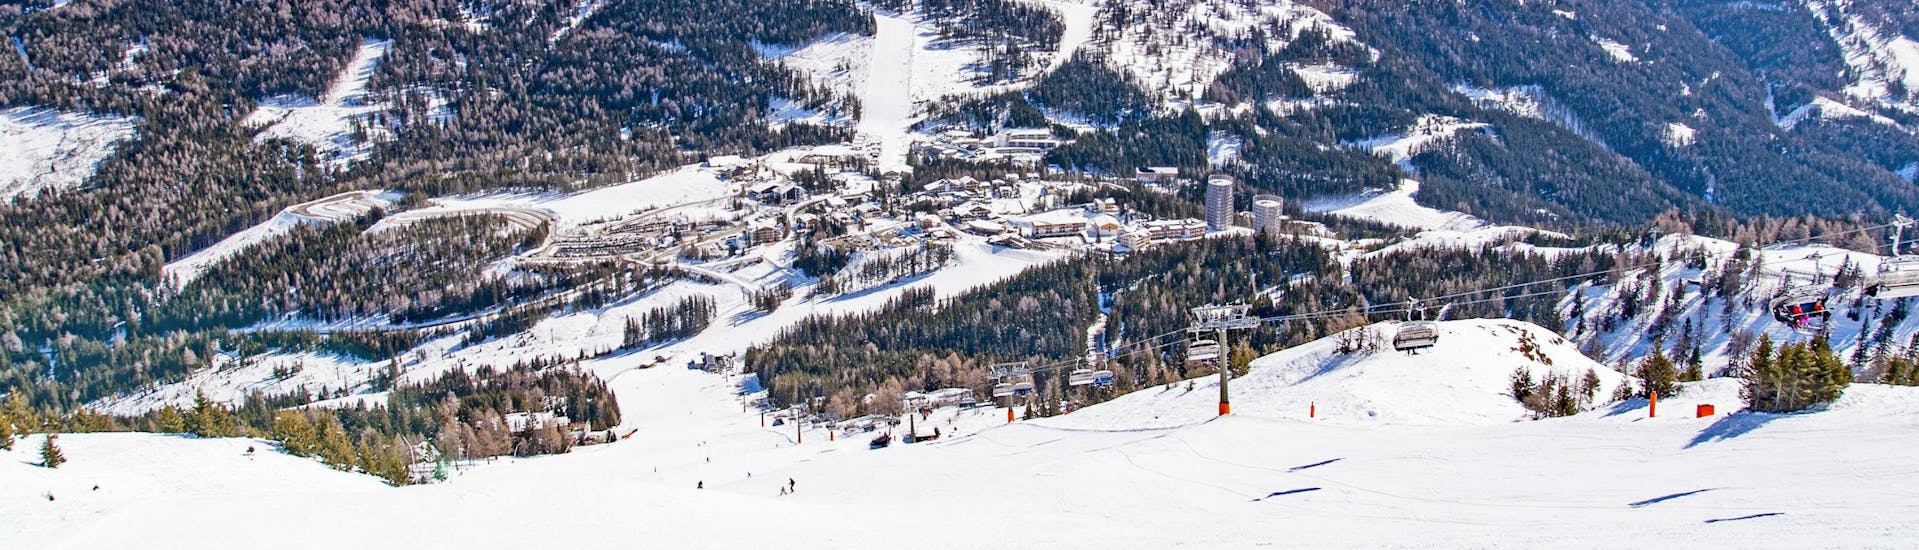 A view of the snow-covered ski slopes in the Austrian ski resort of Katschberg in Carinthia, where skiers can book ski lessons with one of the local ski schools.